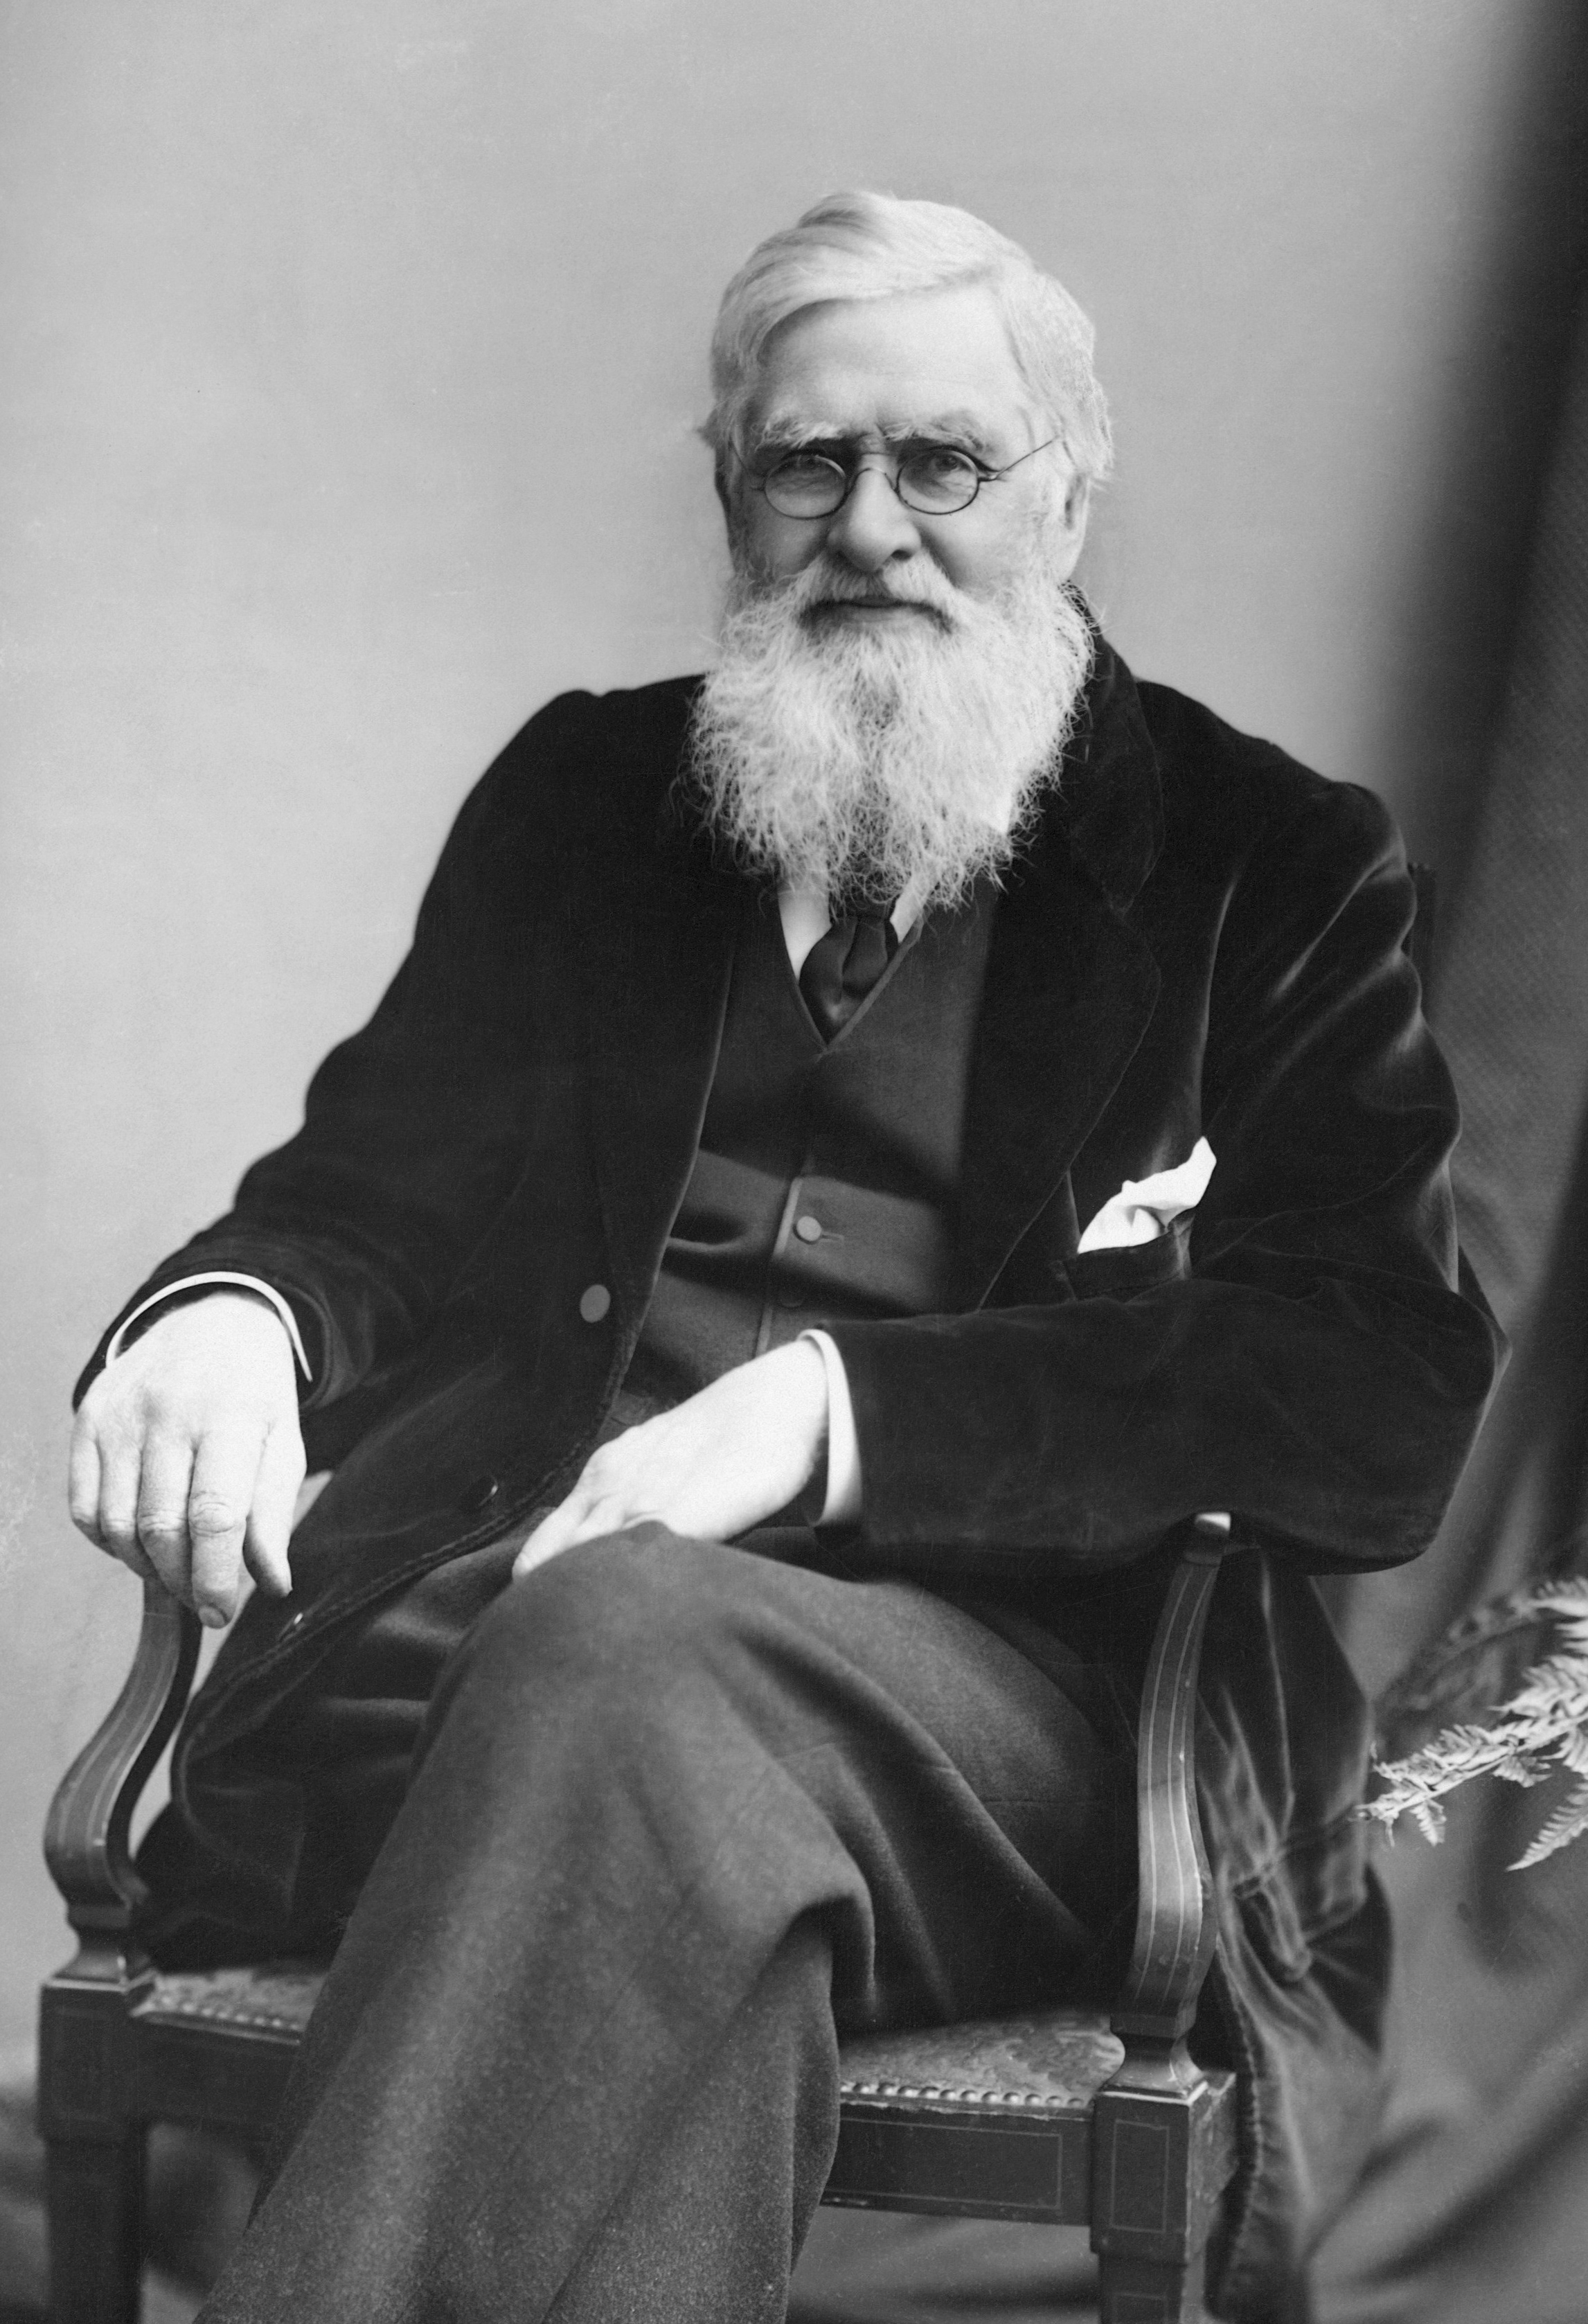 alfred russel wallace theory of evolution